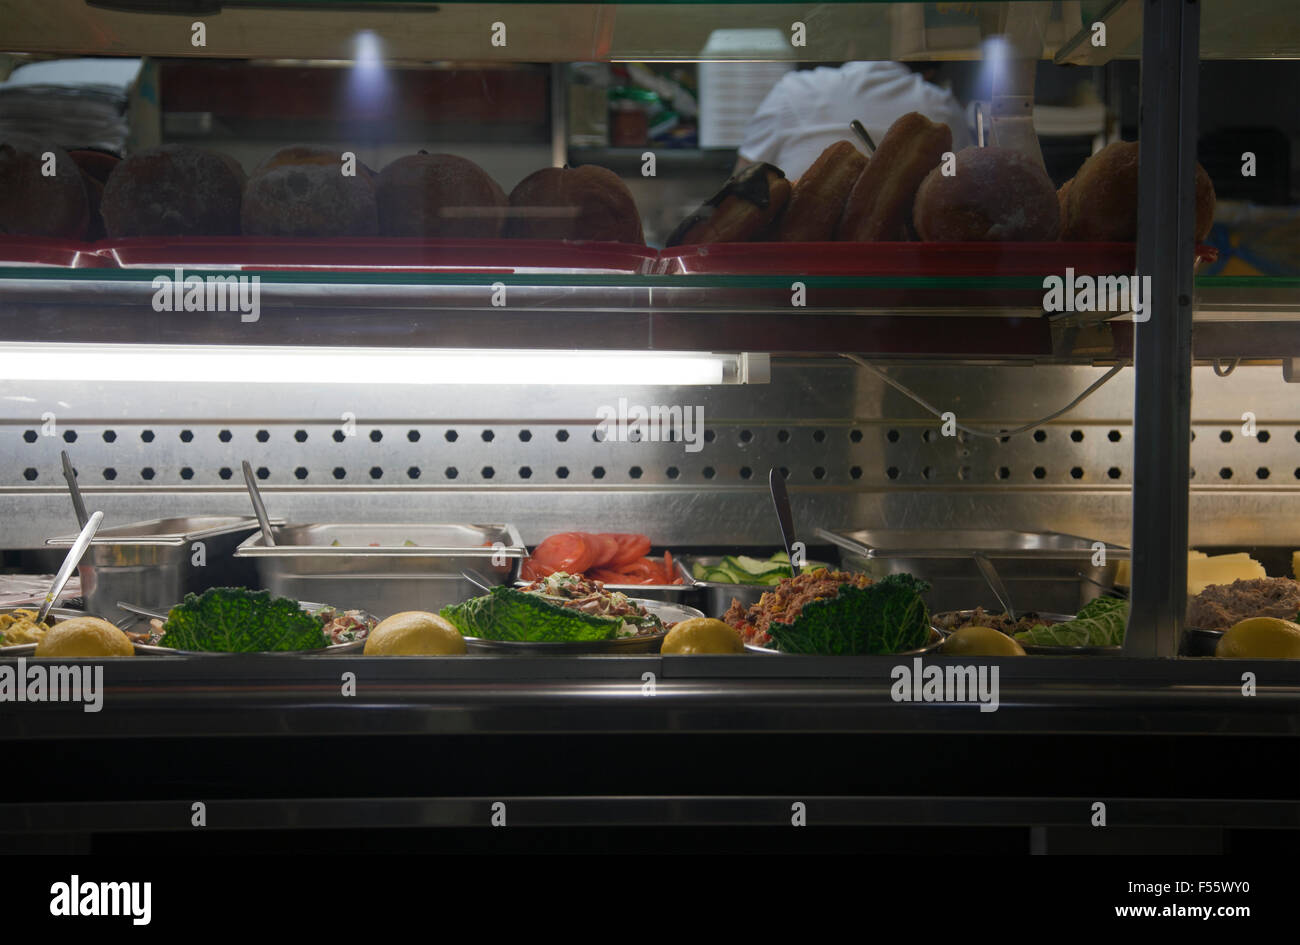 Sandwich Bar display of Food; salad, meats and fillings Stock Photo